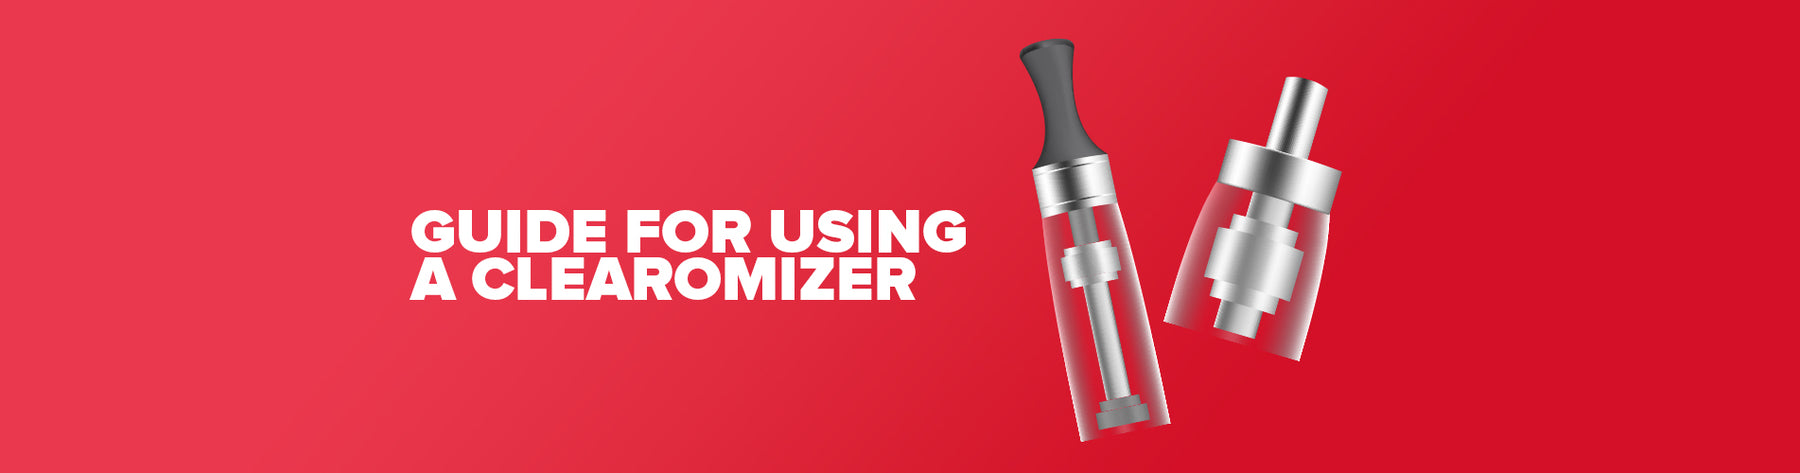 Guide For Using A Clearomizer